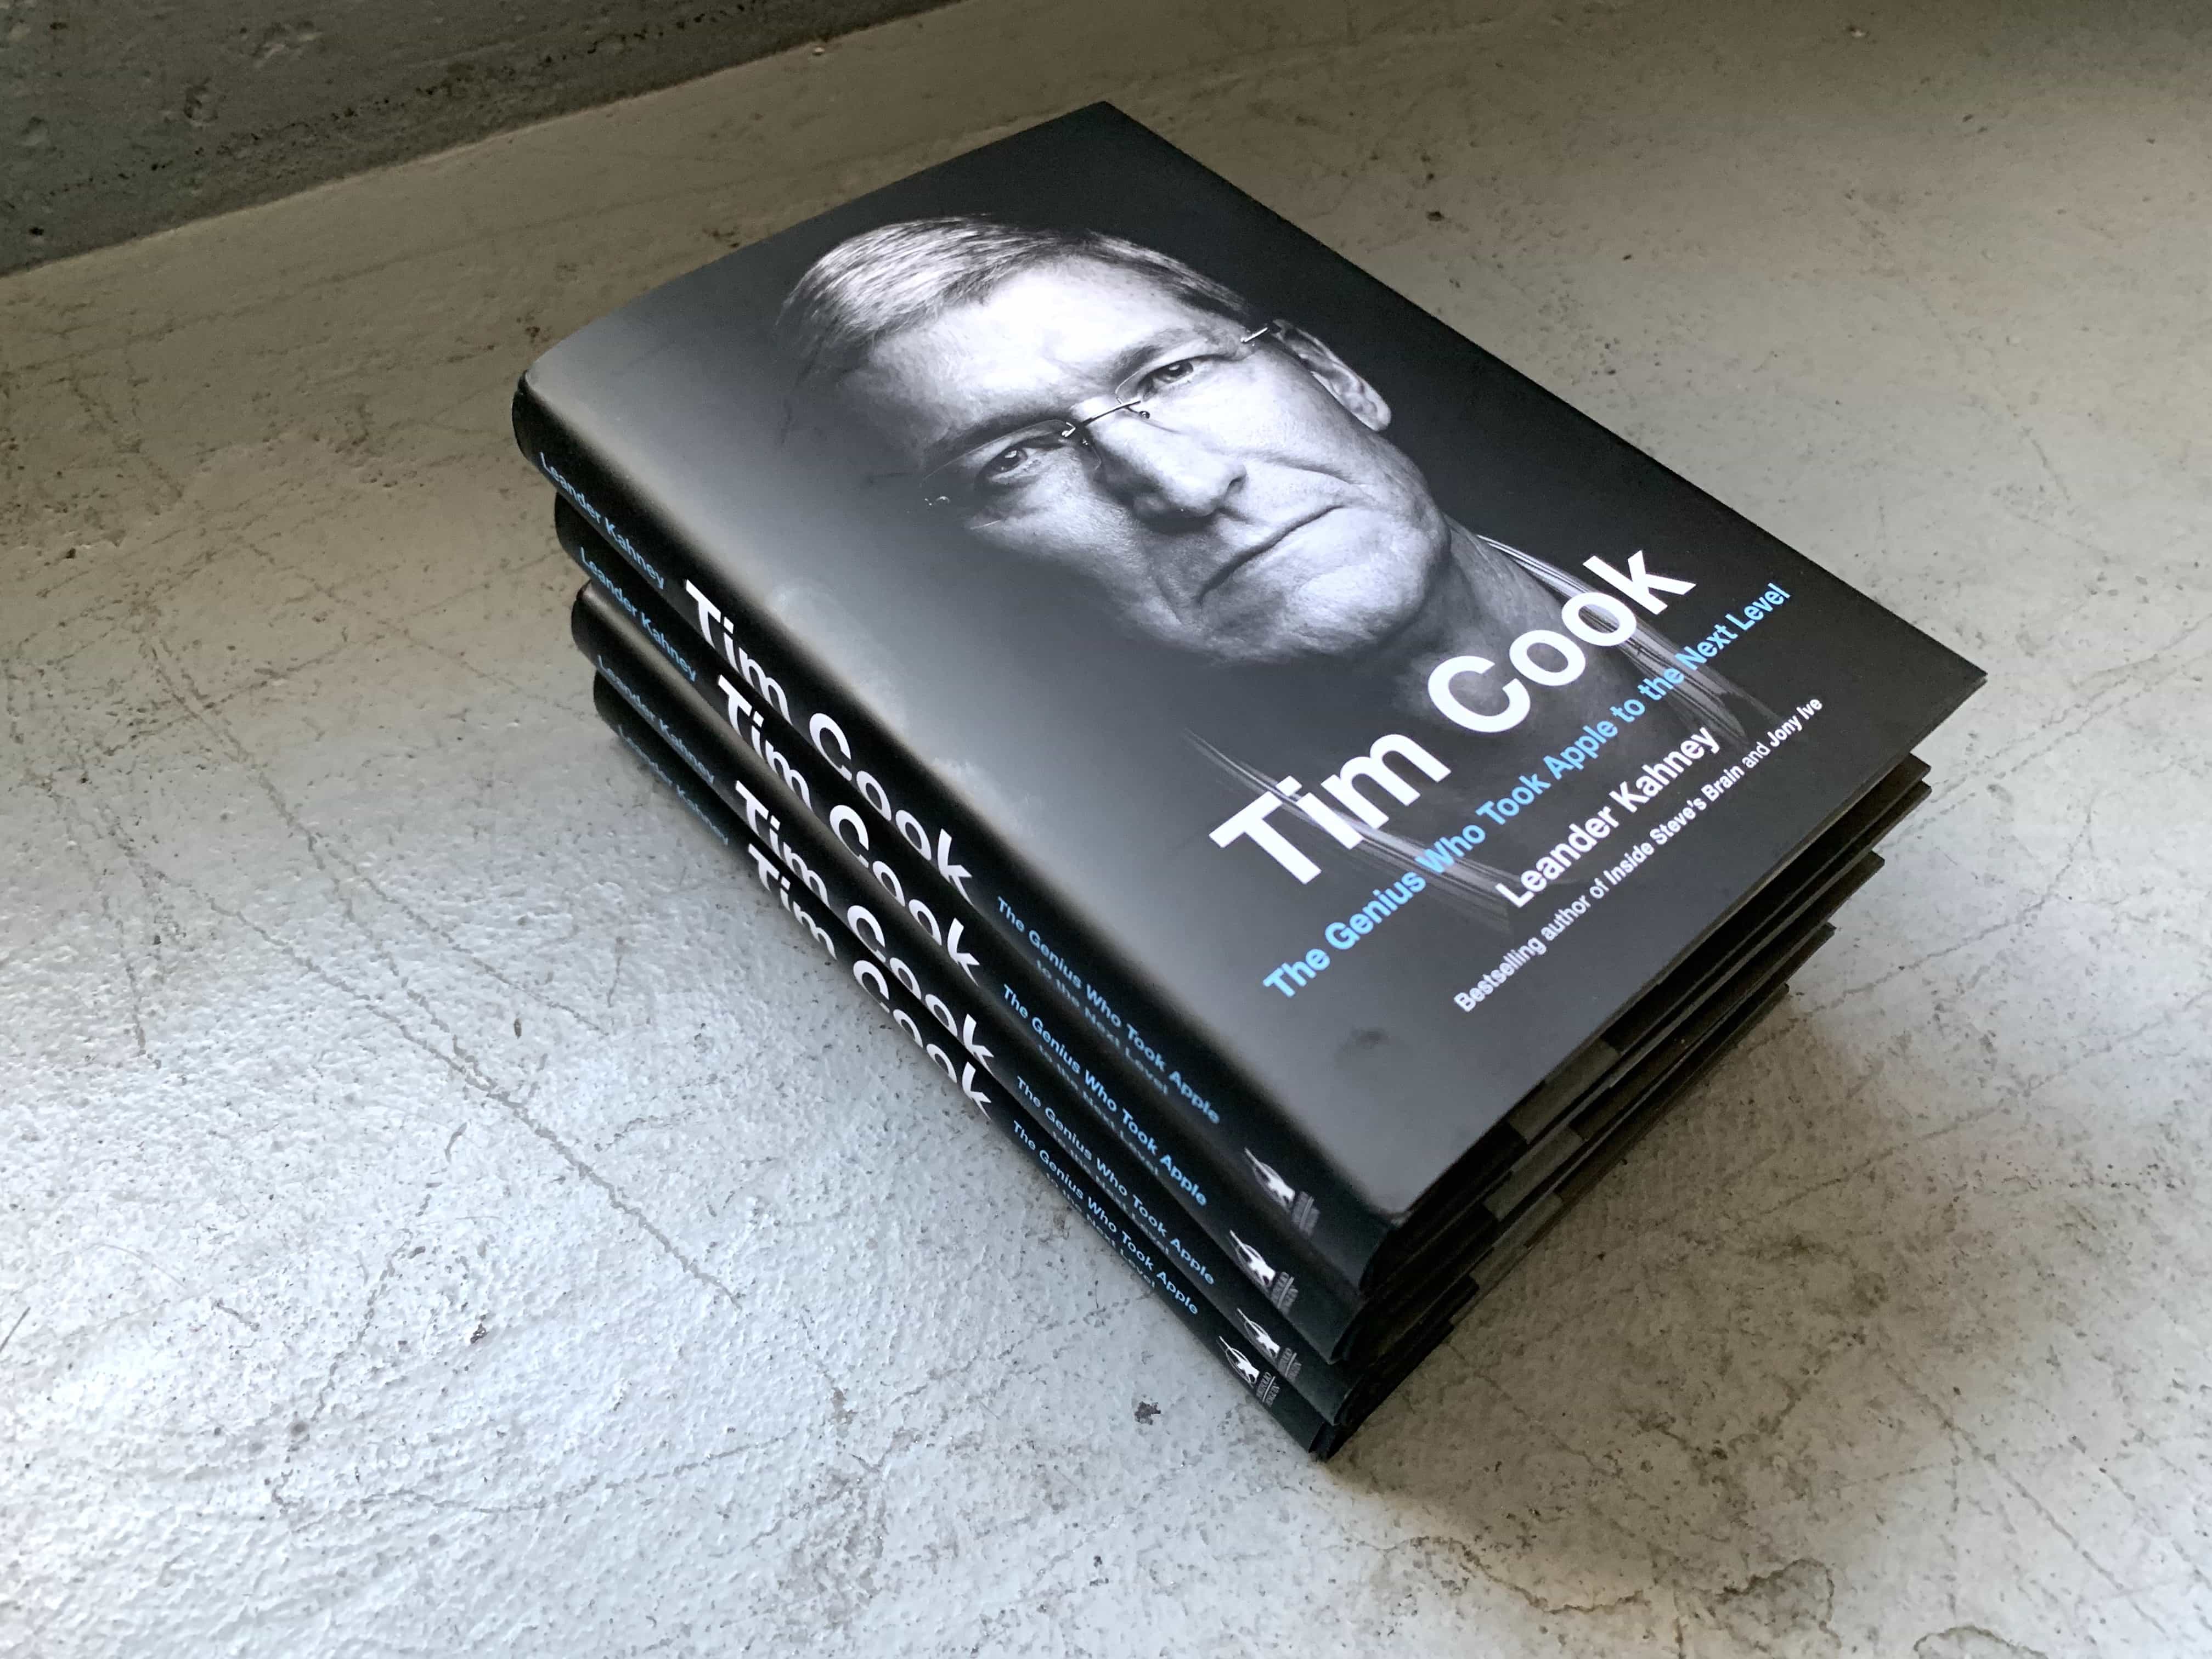 Tim Cook: the Genius Who Took Apple to the Next Level